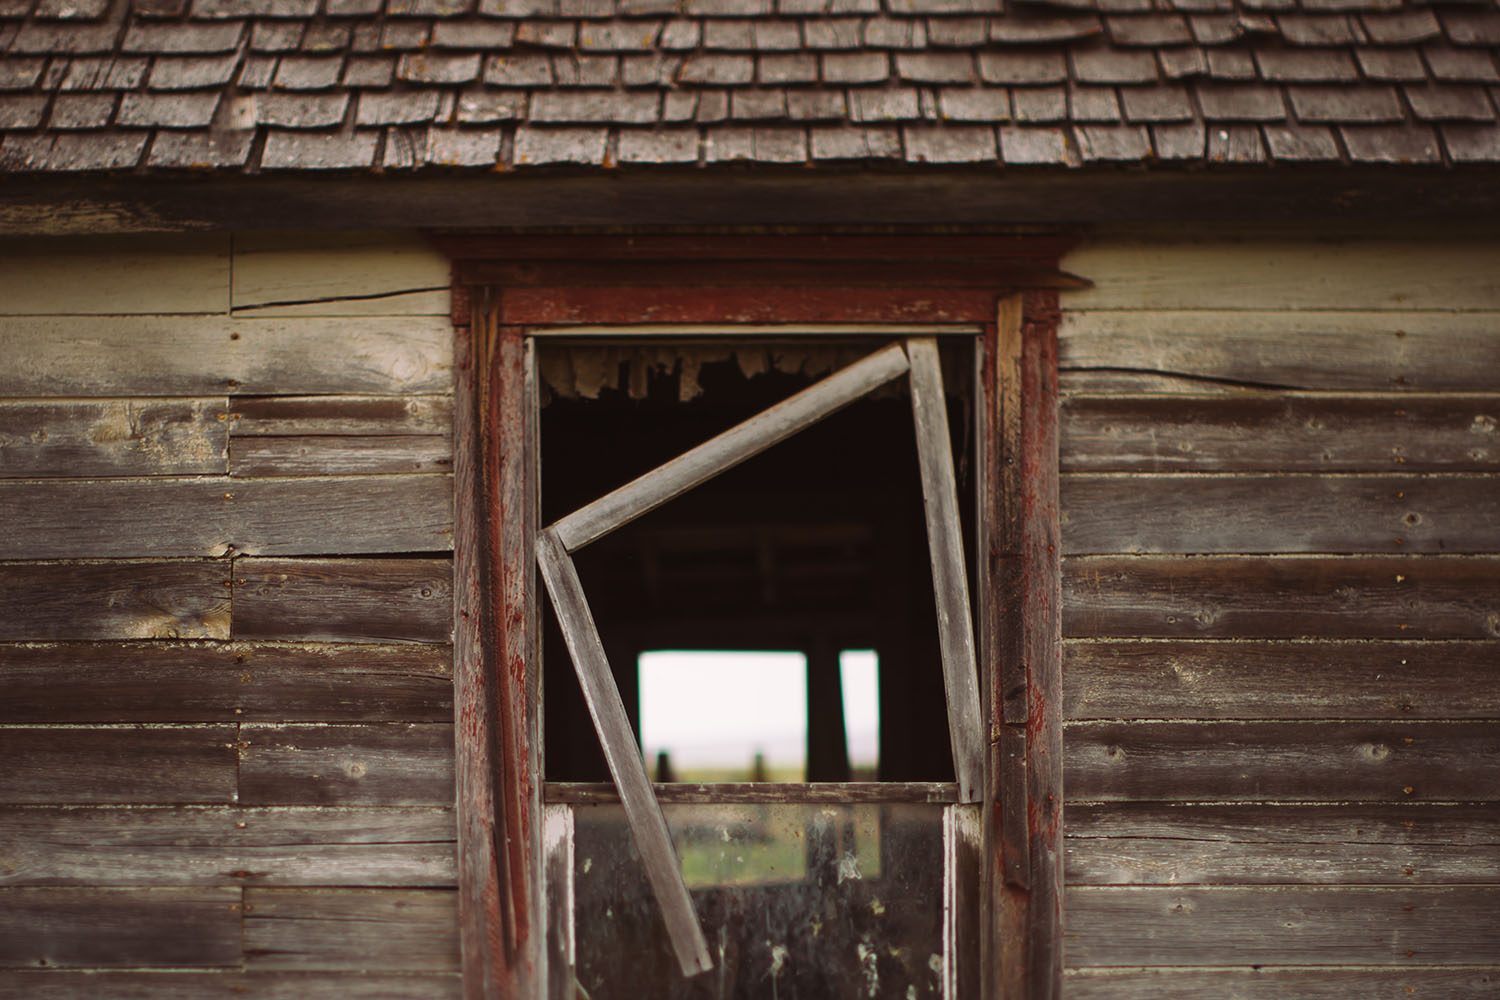 The bent frame of an old window rests crookedly in its hole in an abandoned Montana outbuilding